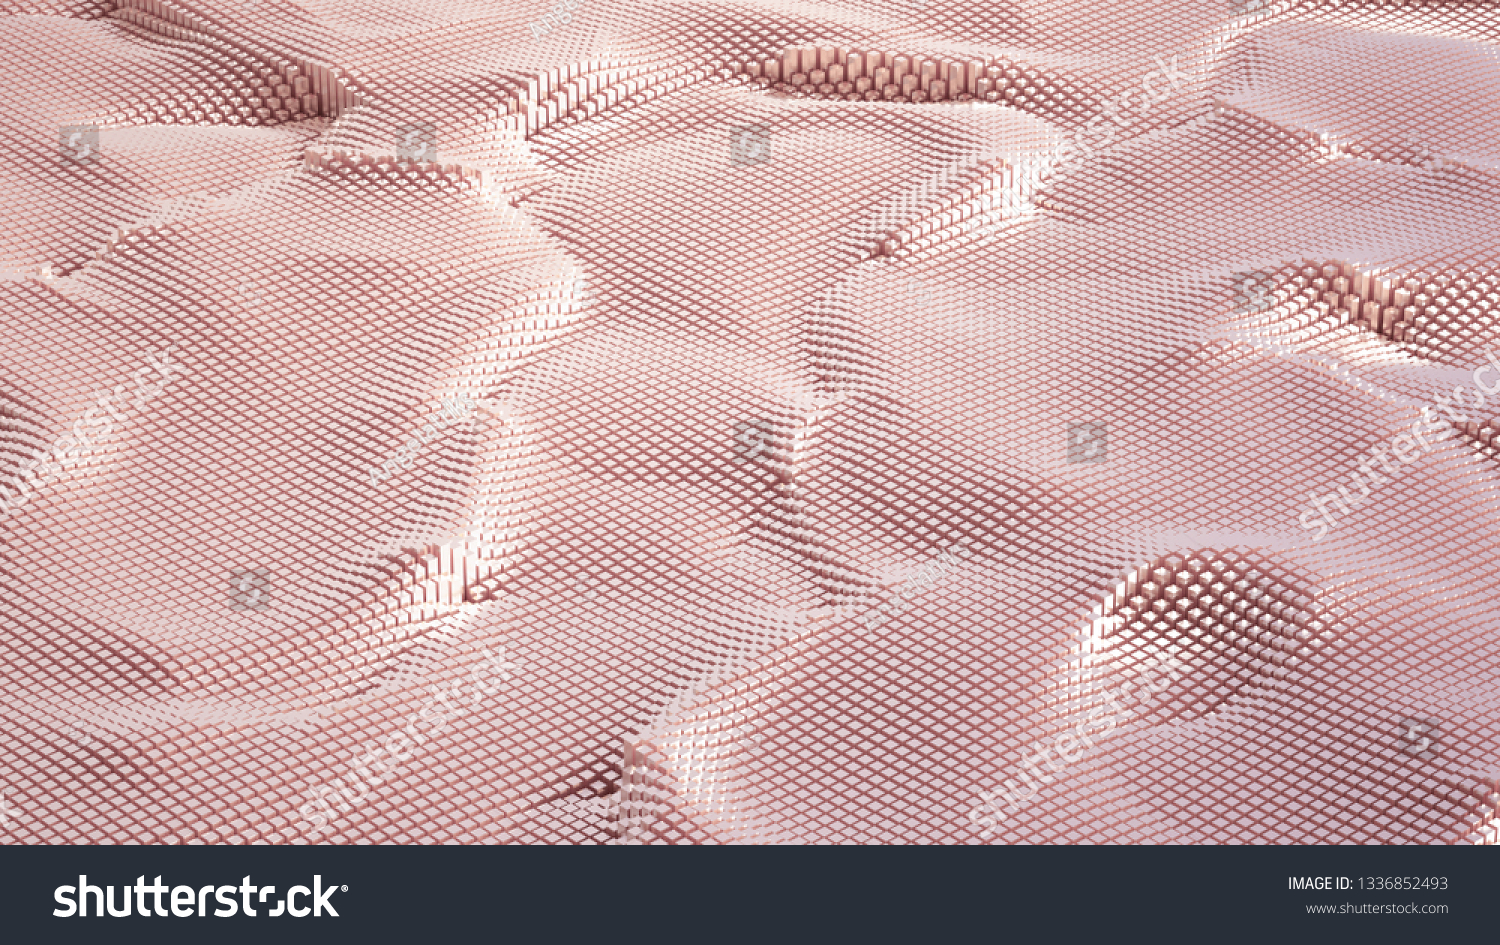 Abstract geometry background. 3d illustration, 3d rendering. #1336852493